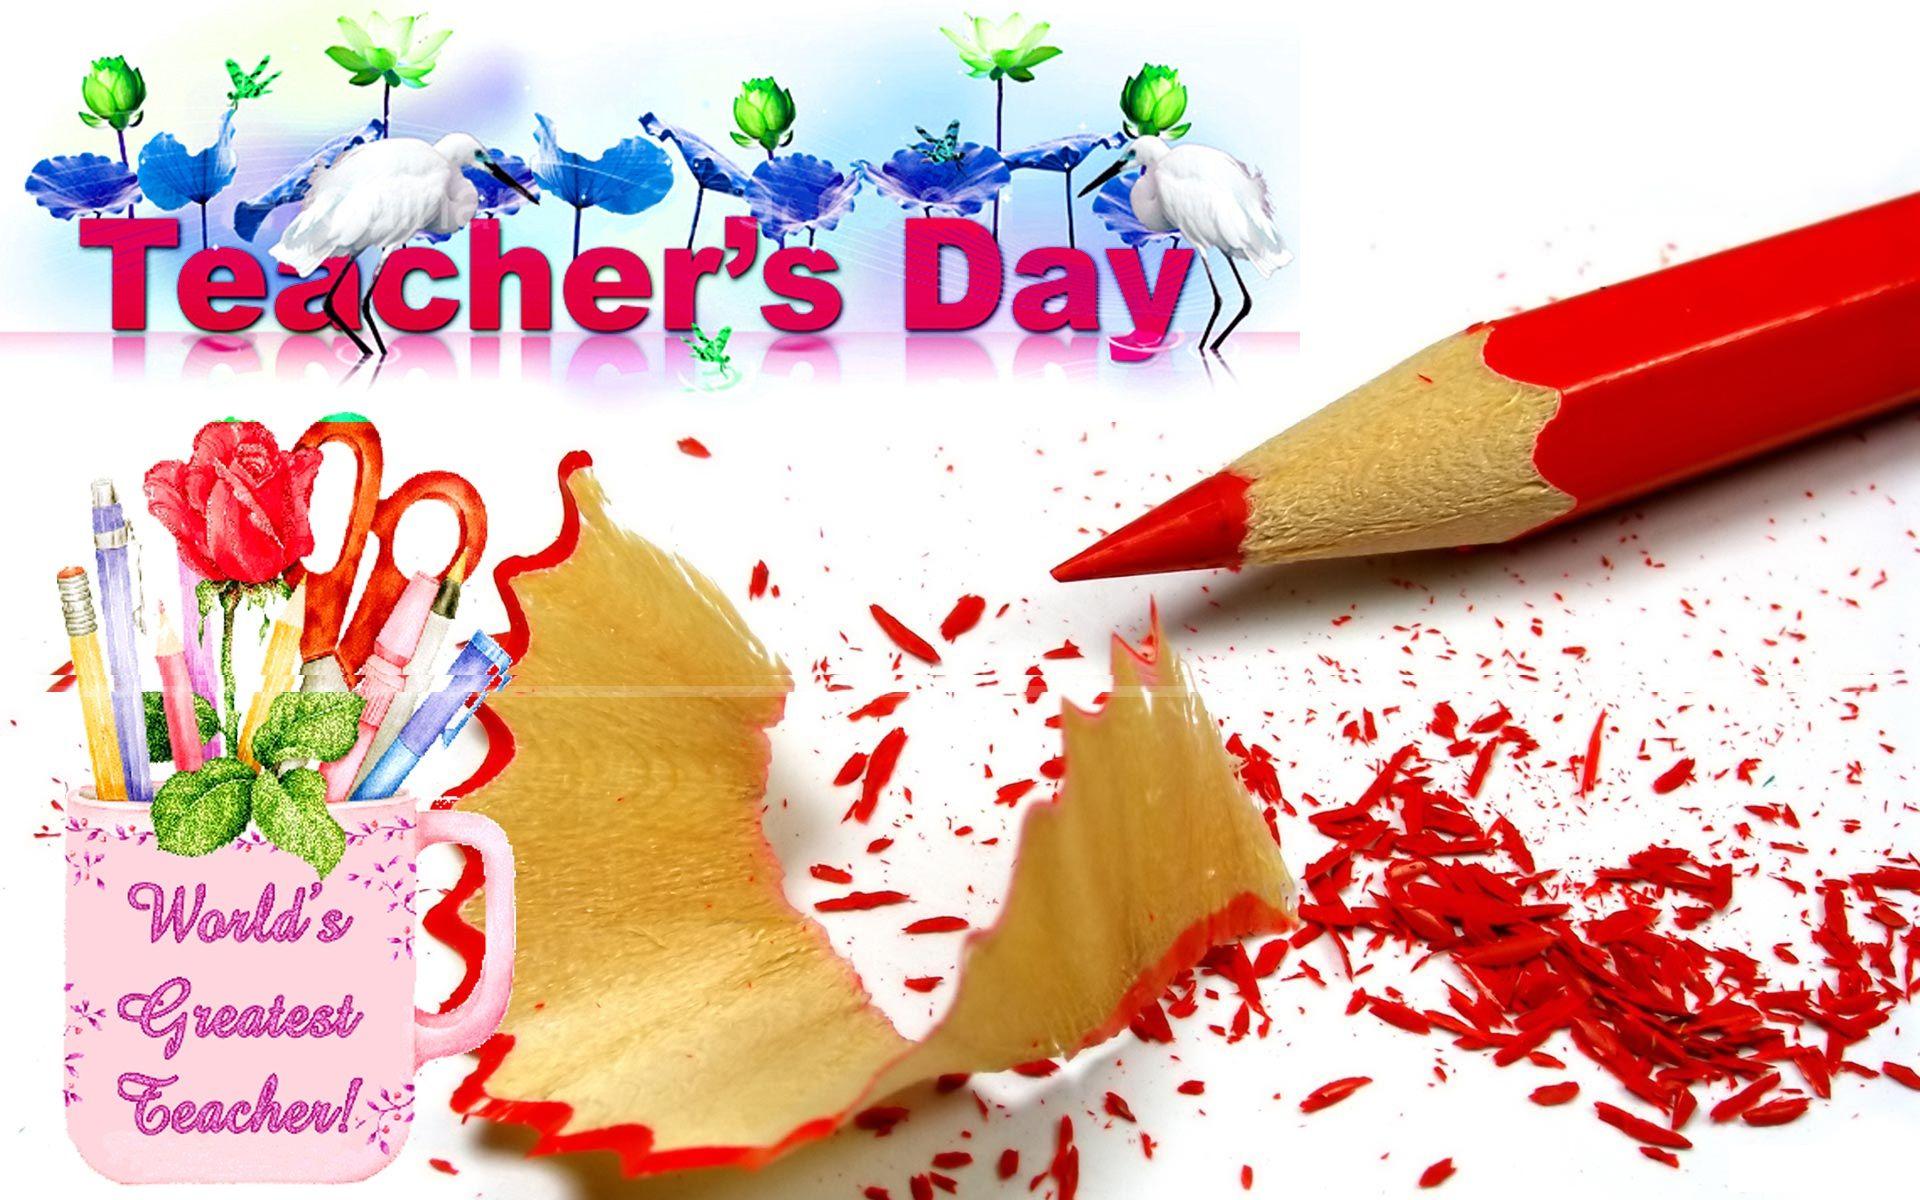 Happy Teachers Day HD Image, Wallpaper, Pics, and Photo Free